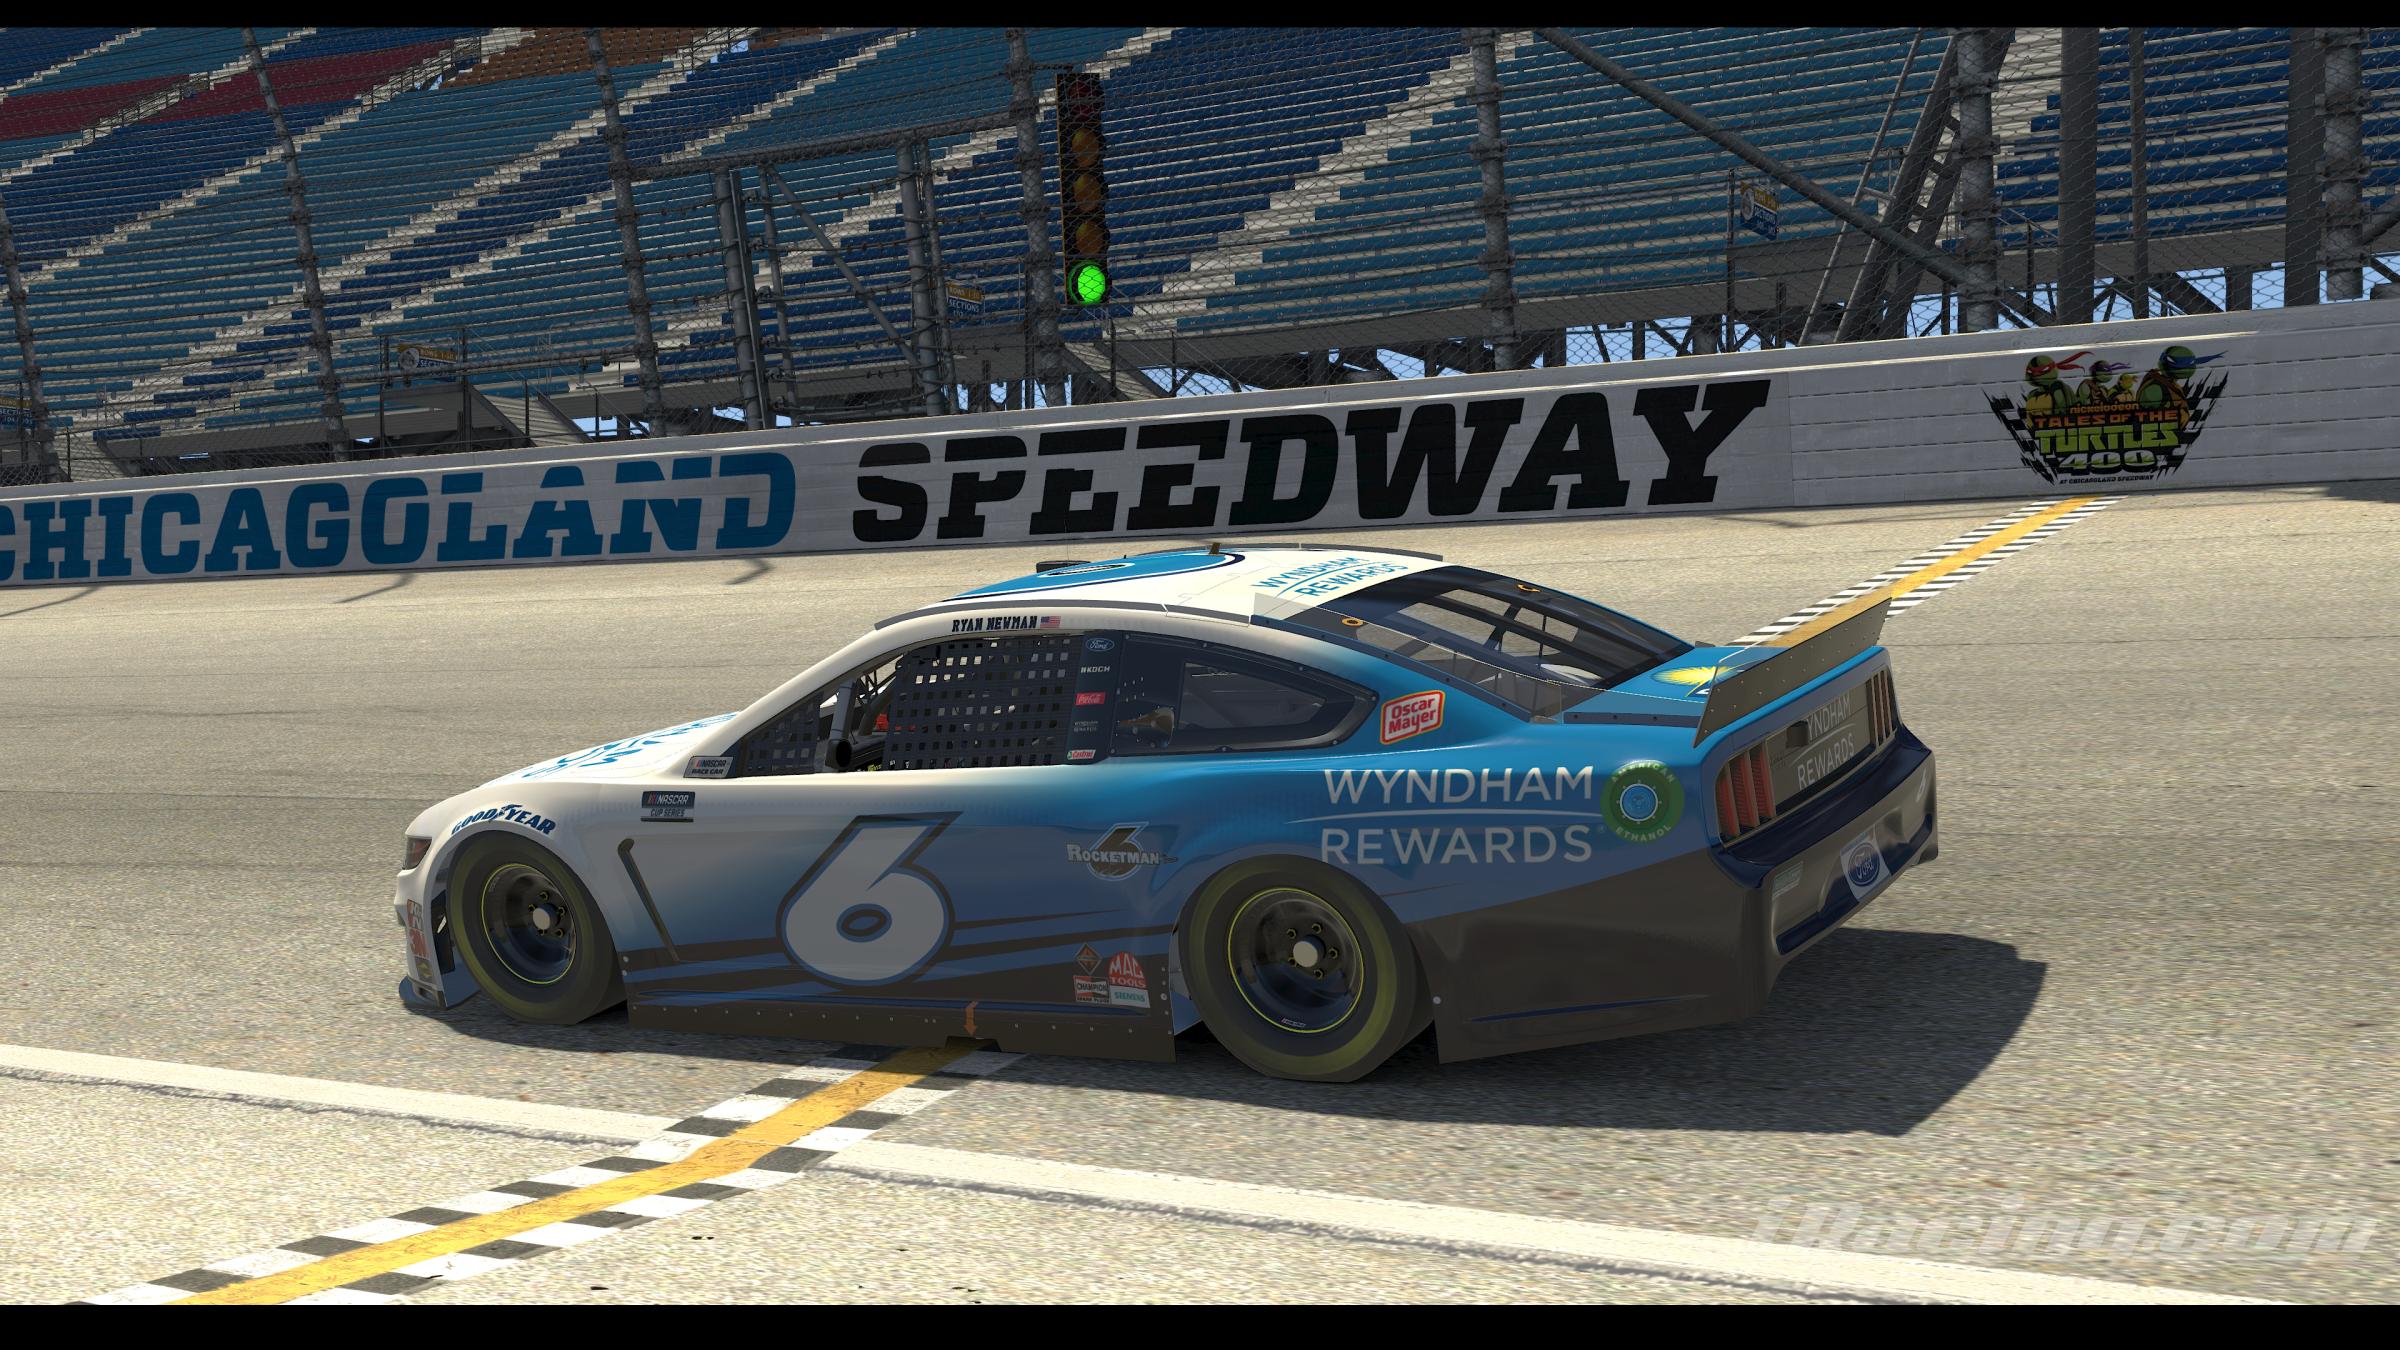 2020 Ross Chastain Wyndham Rewards by Thomas Sink - Trading Paints